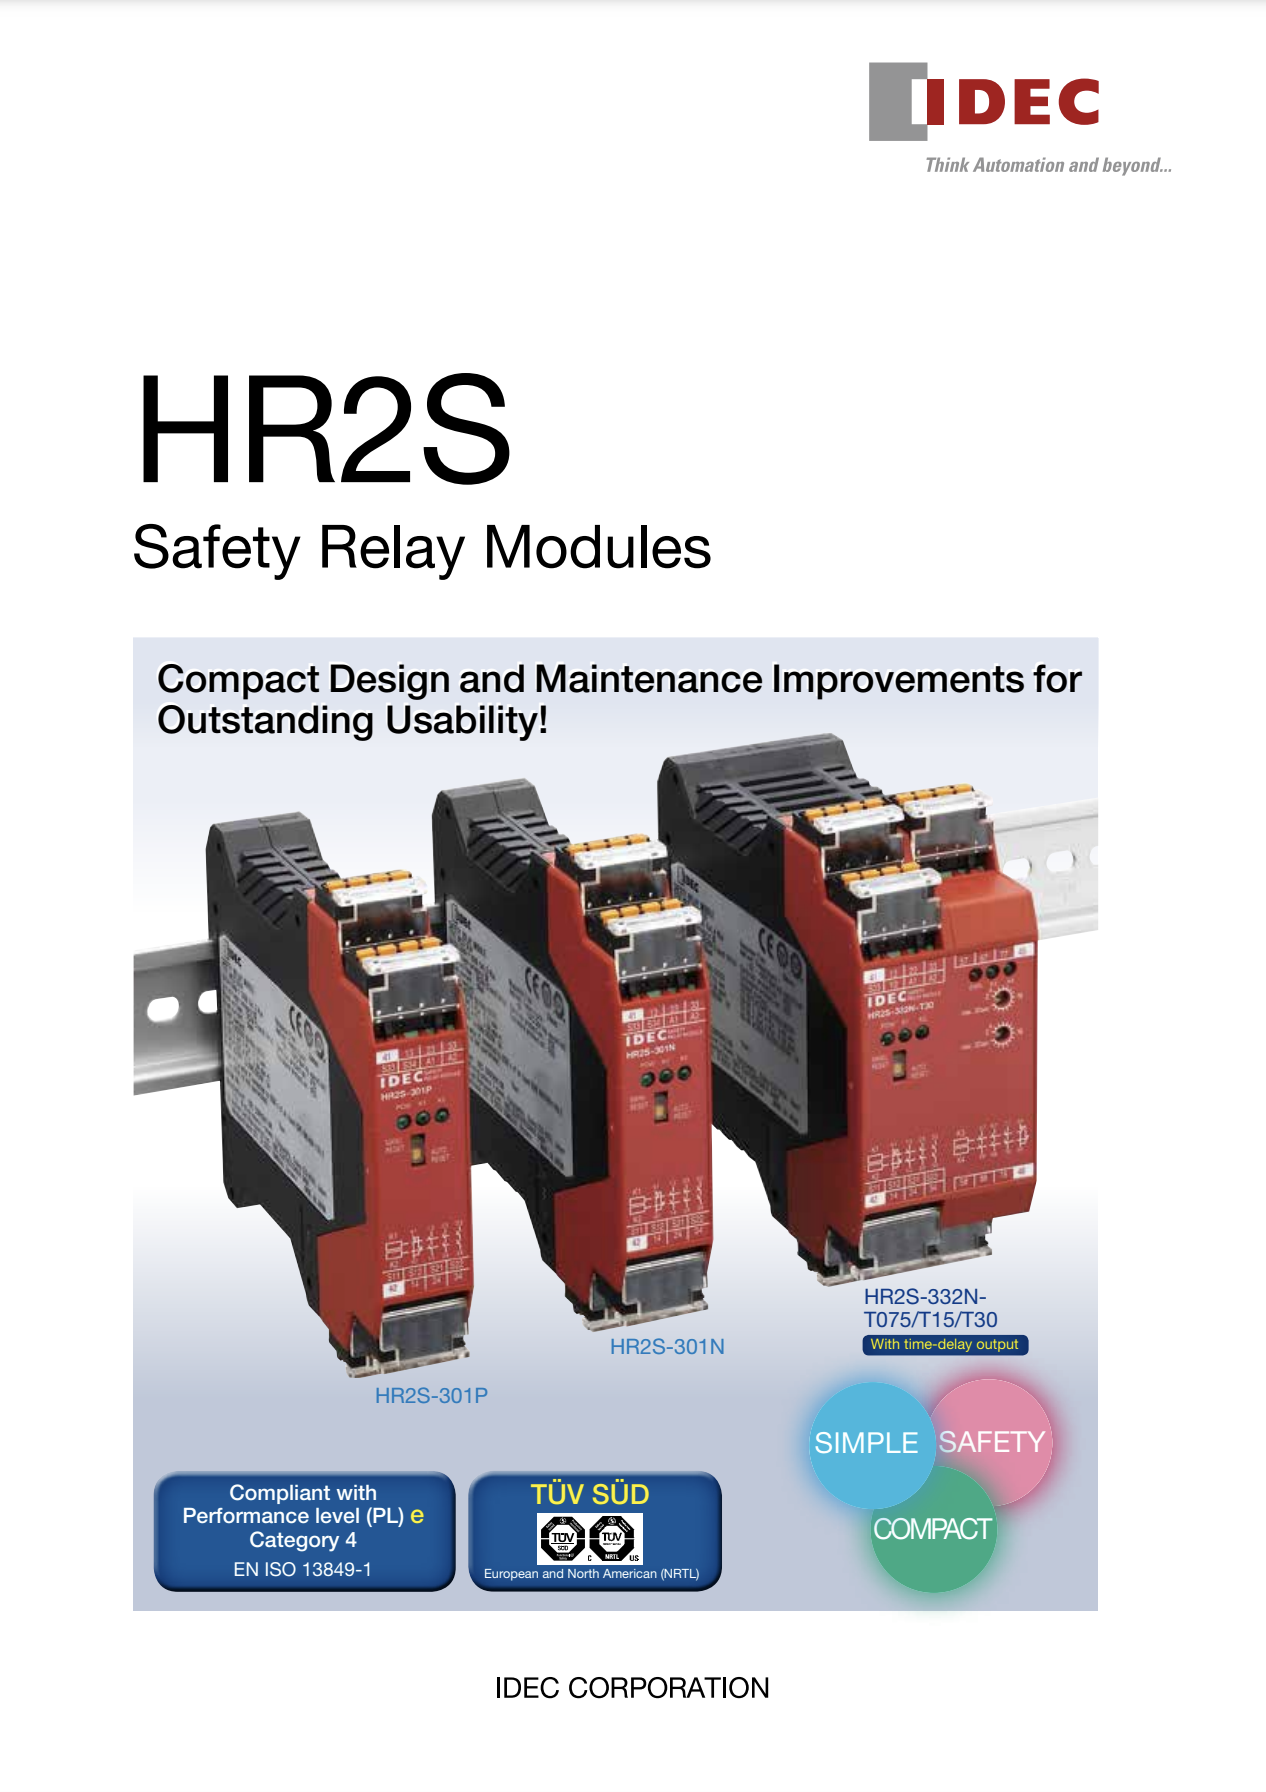 IDEC HR2S Safety Relay Modules Catalogue